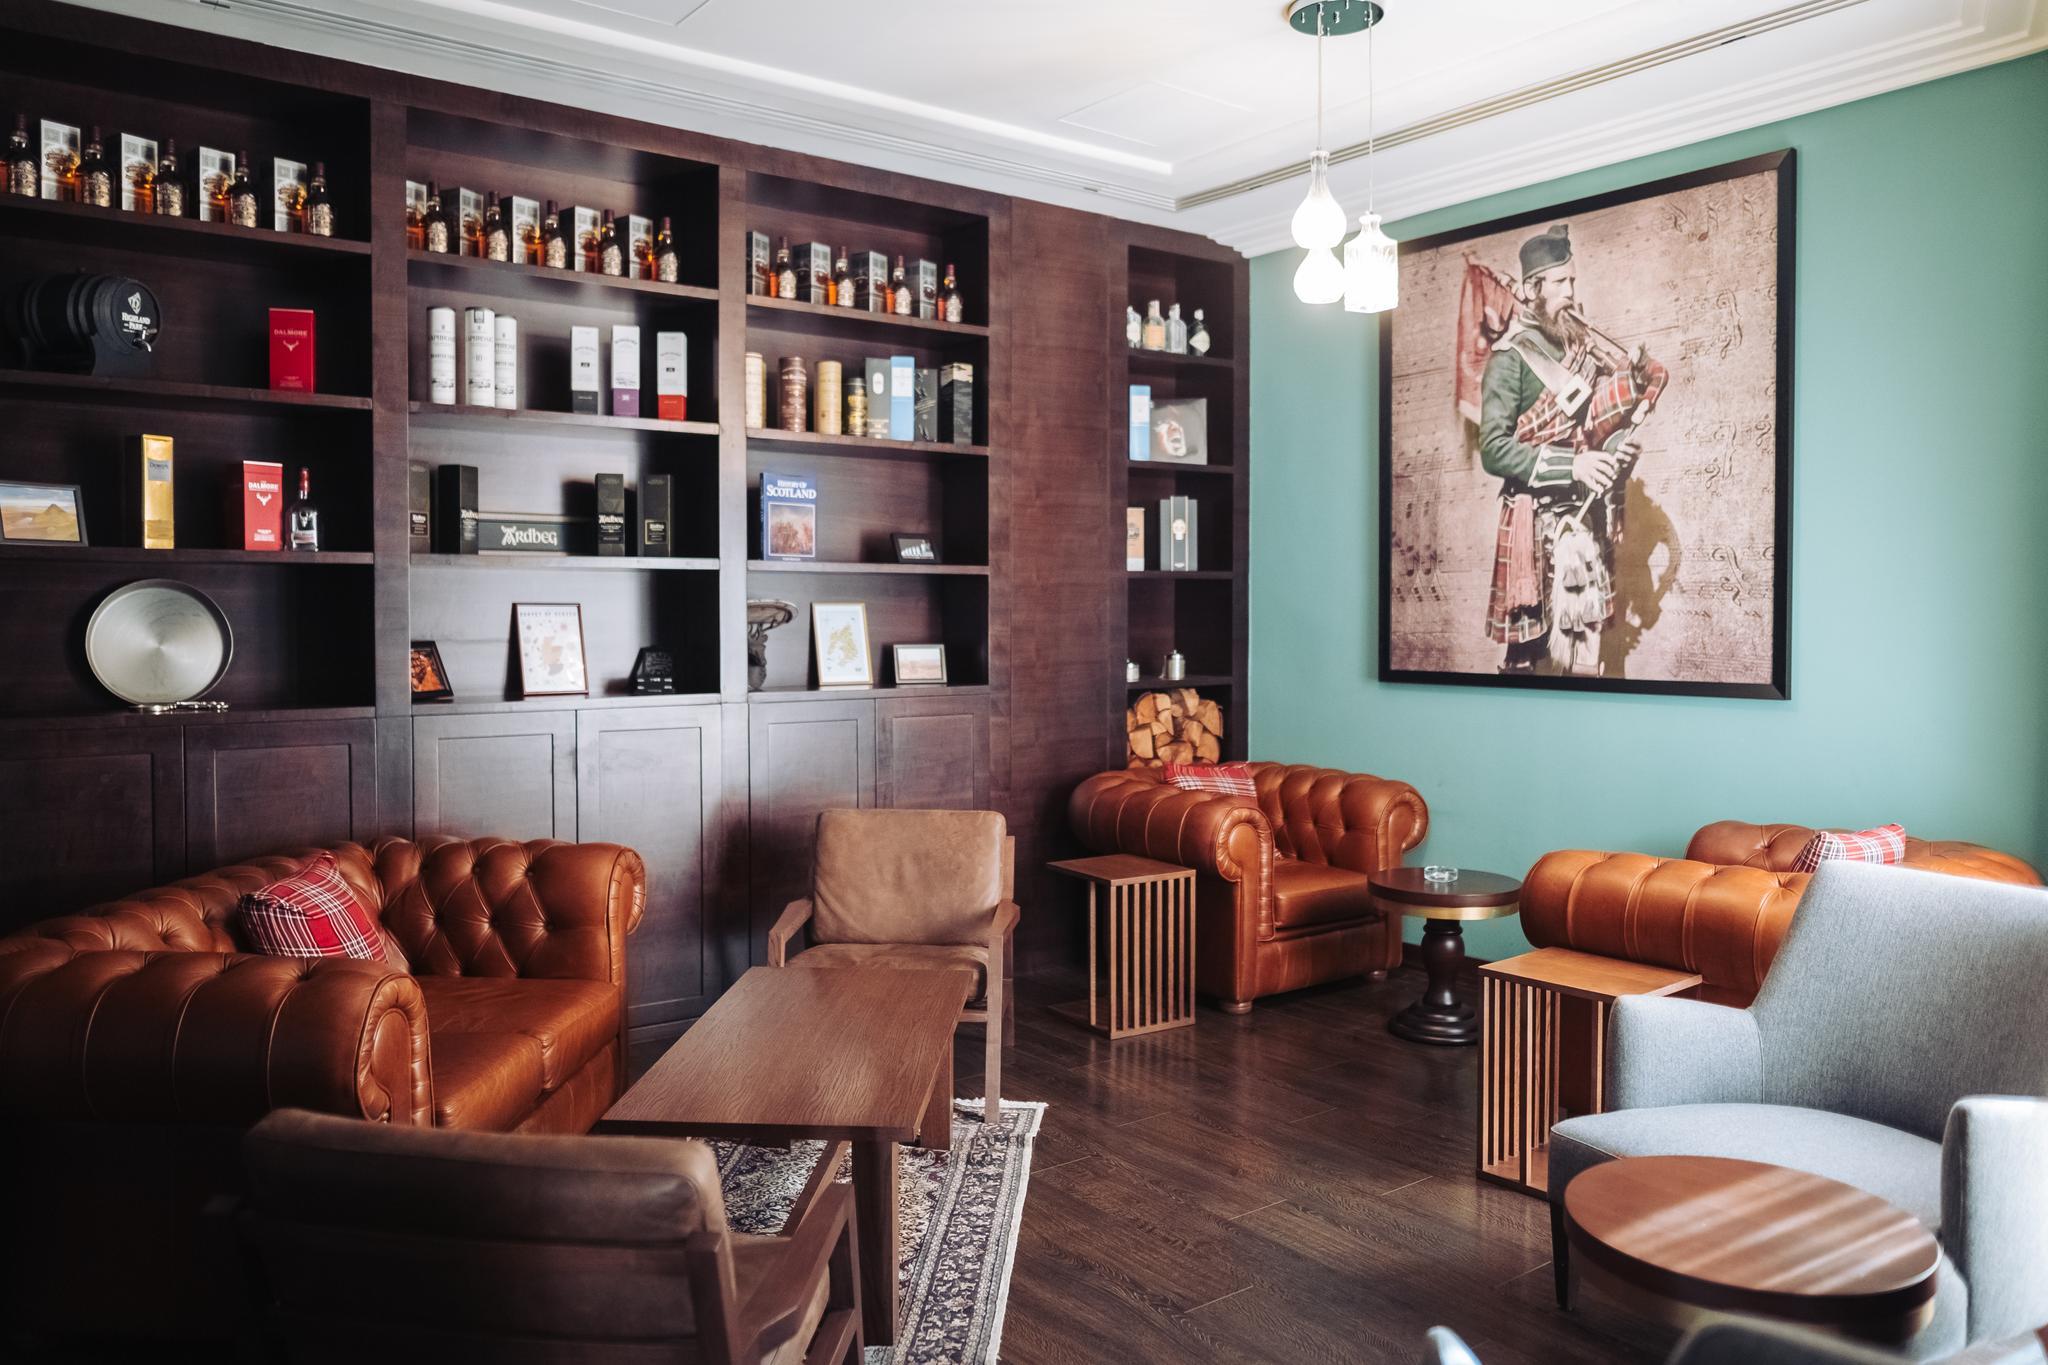 4 REASONS TO DINE & DRINK AT THIS SCOTTISH BAR IN DUBAI